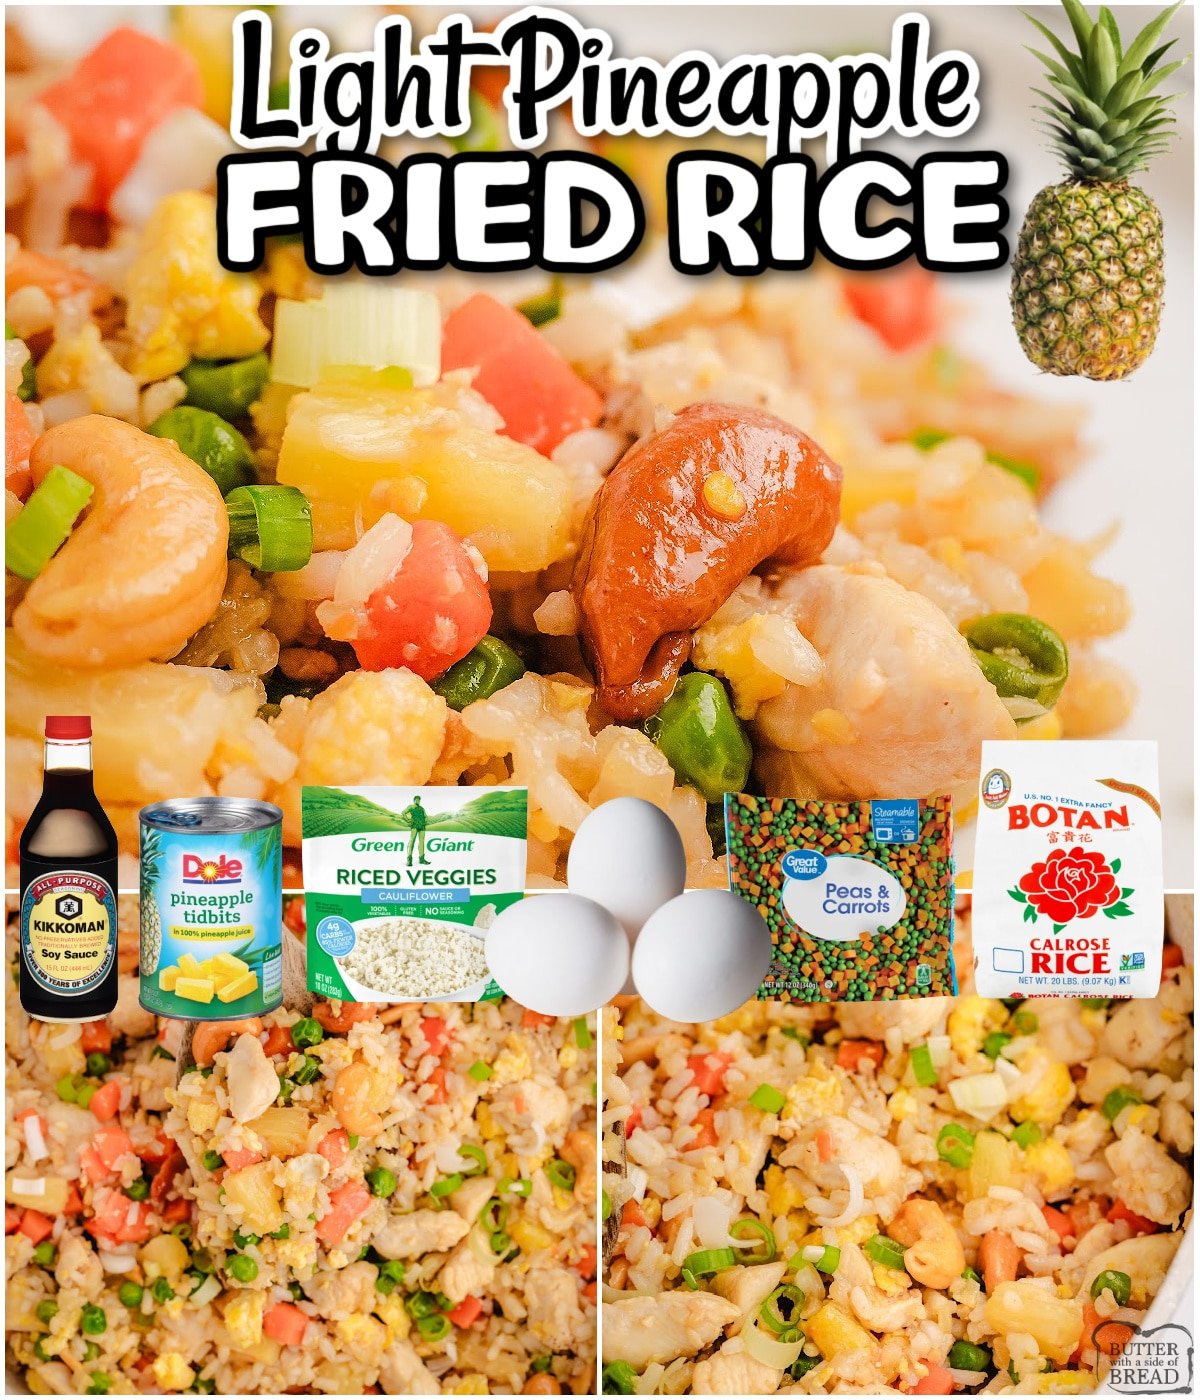 Light Pineapple Fried Rice is packed with veggies and fantastic flavor for an incredible take on traditional chicken fried rice! You'll love the bright, fresh flavor in this easy weeknight dinner! 